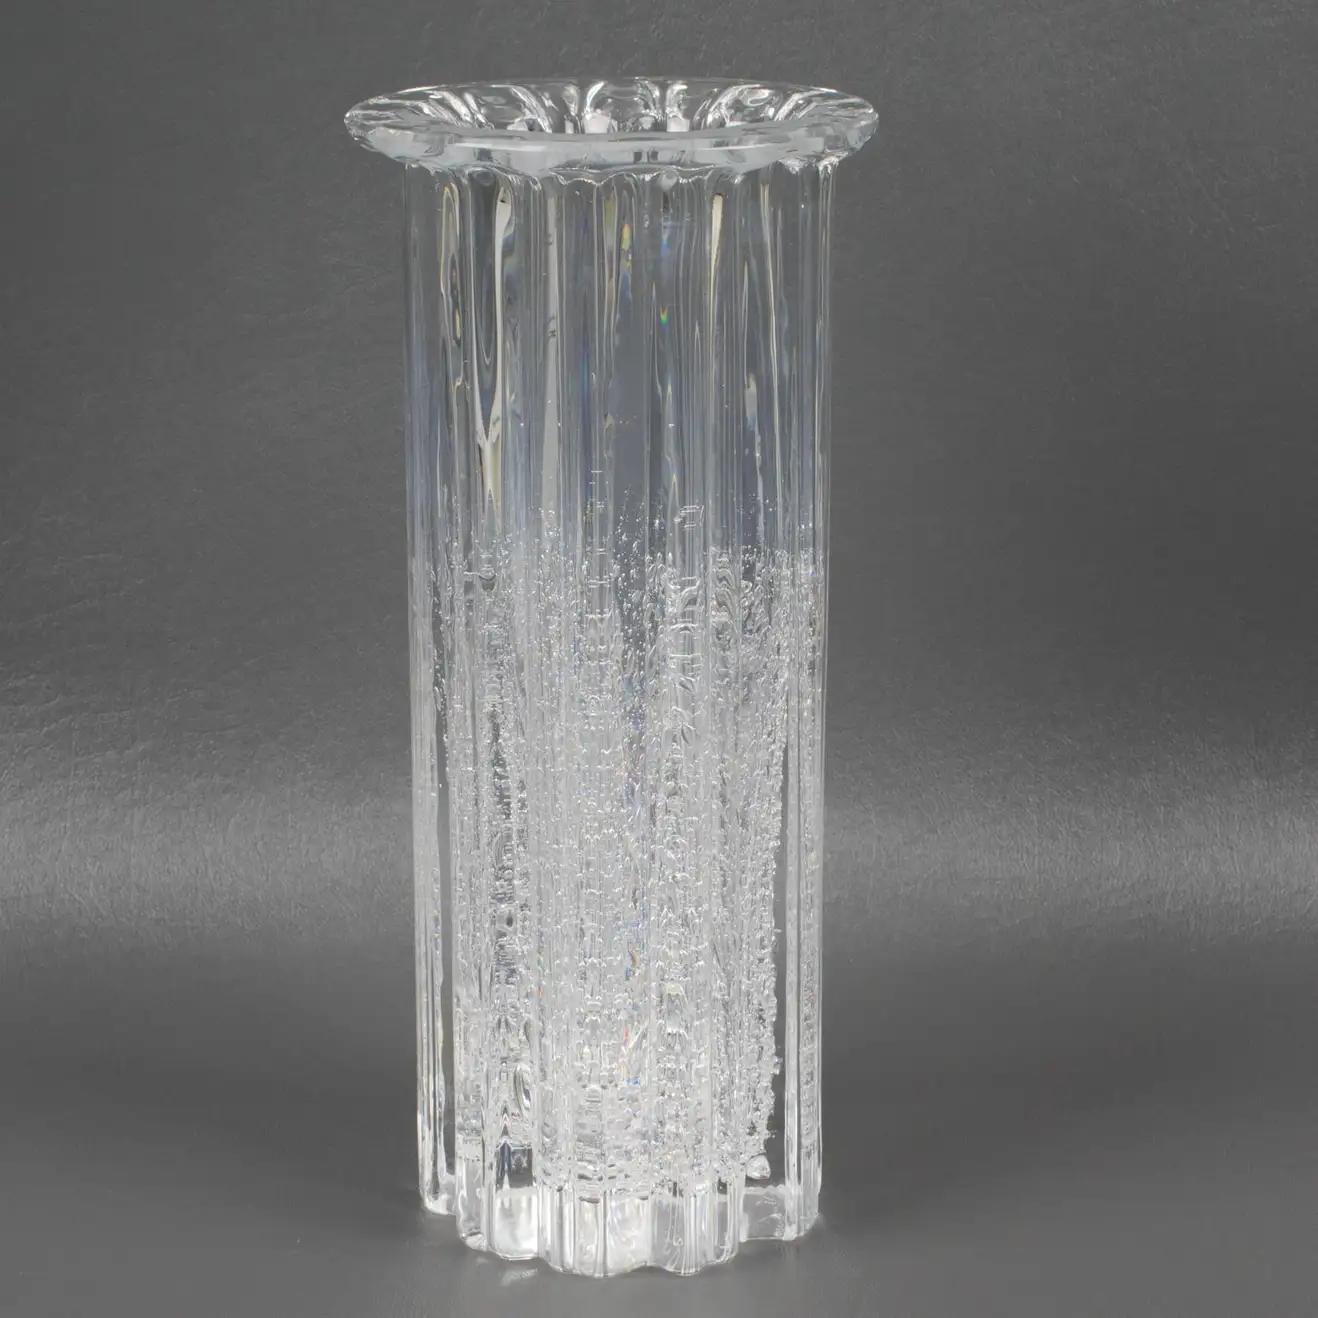 Willy Johansson for Hadeland Norway Art-Glass 